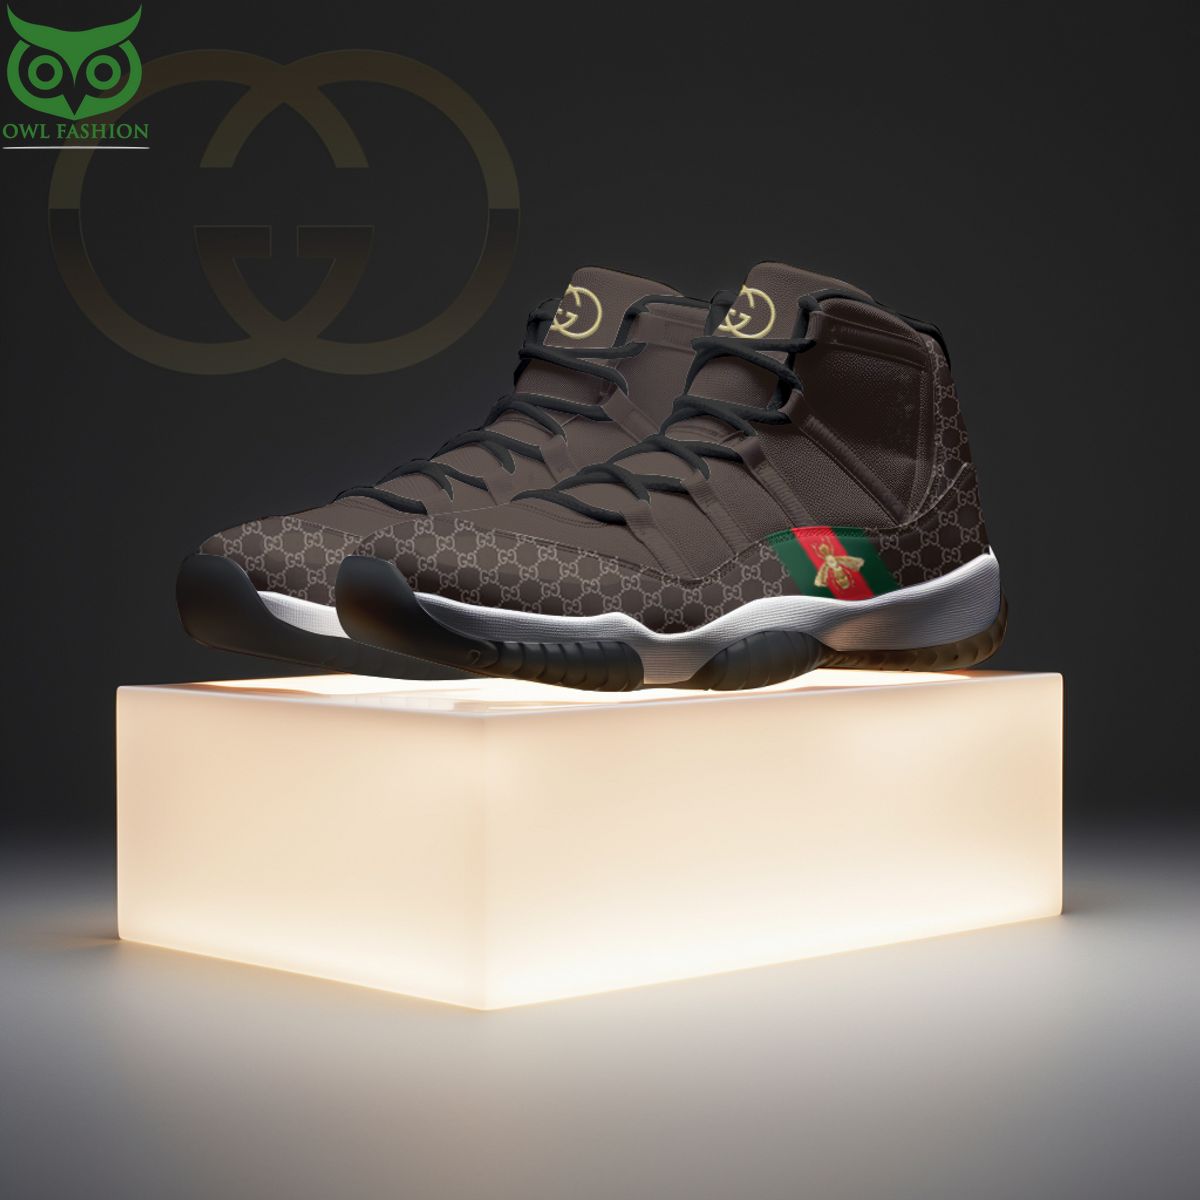 Gucci Brand Bee Symbol Air Jordan 11 The attention to detail is remarkable.